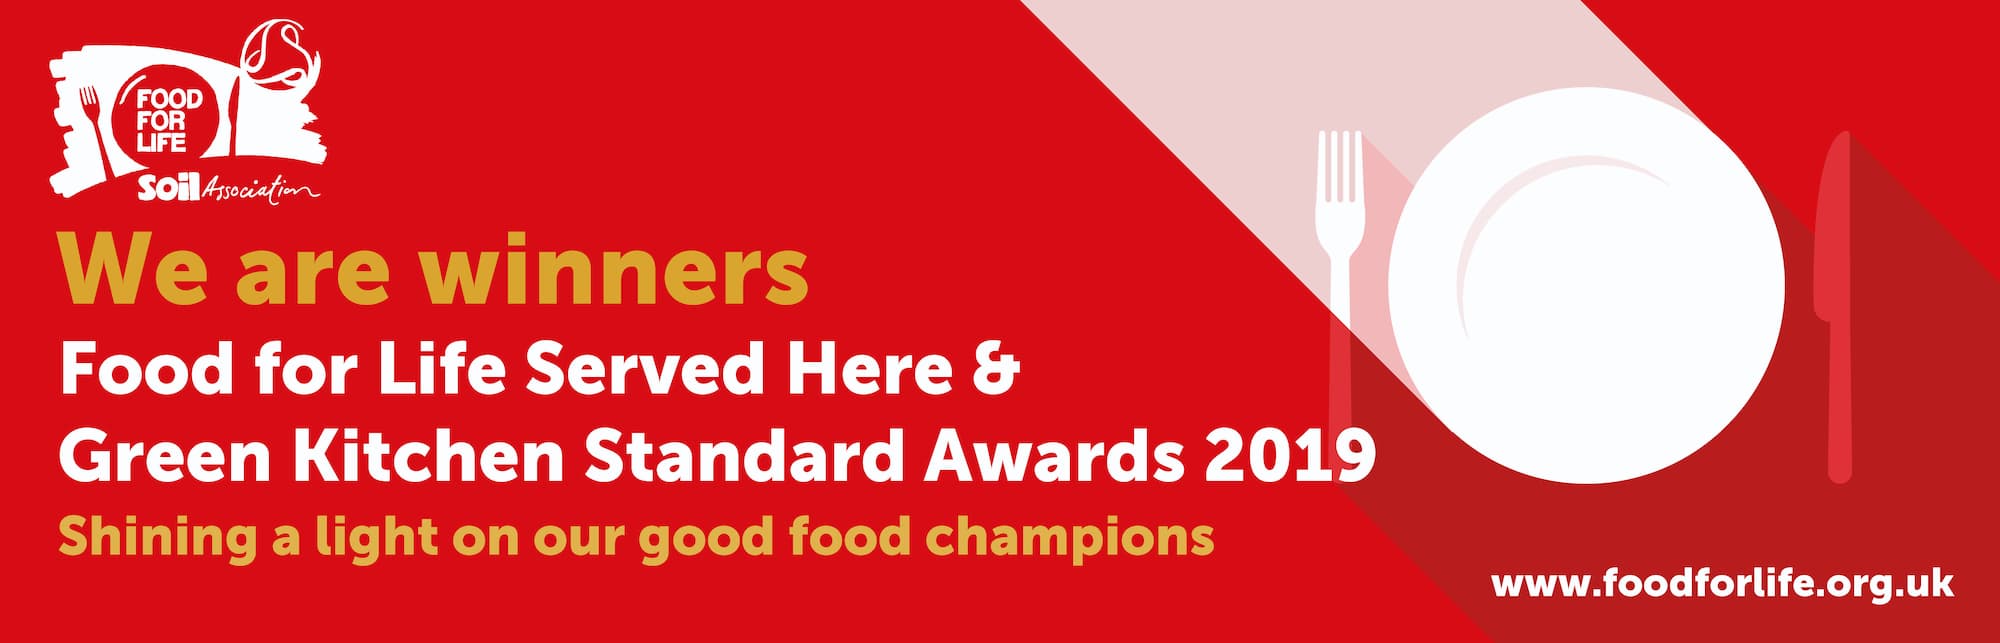 food for life award badge for Summerfield House care home